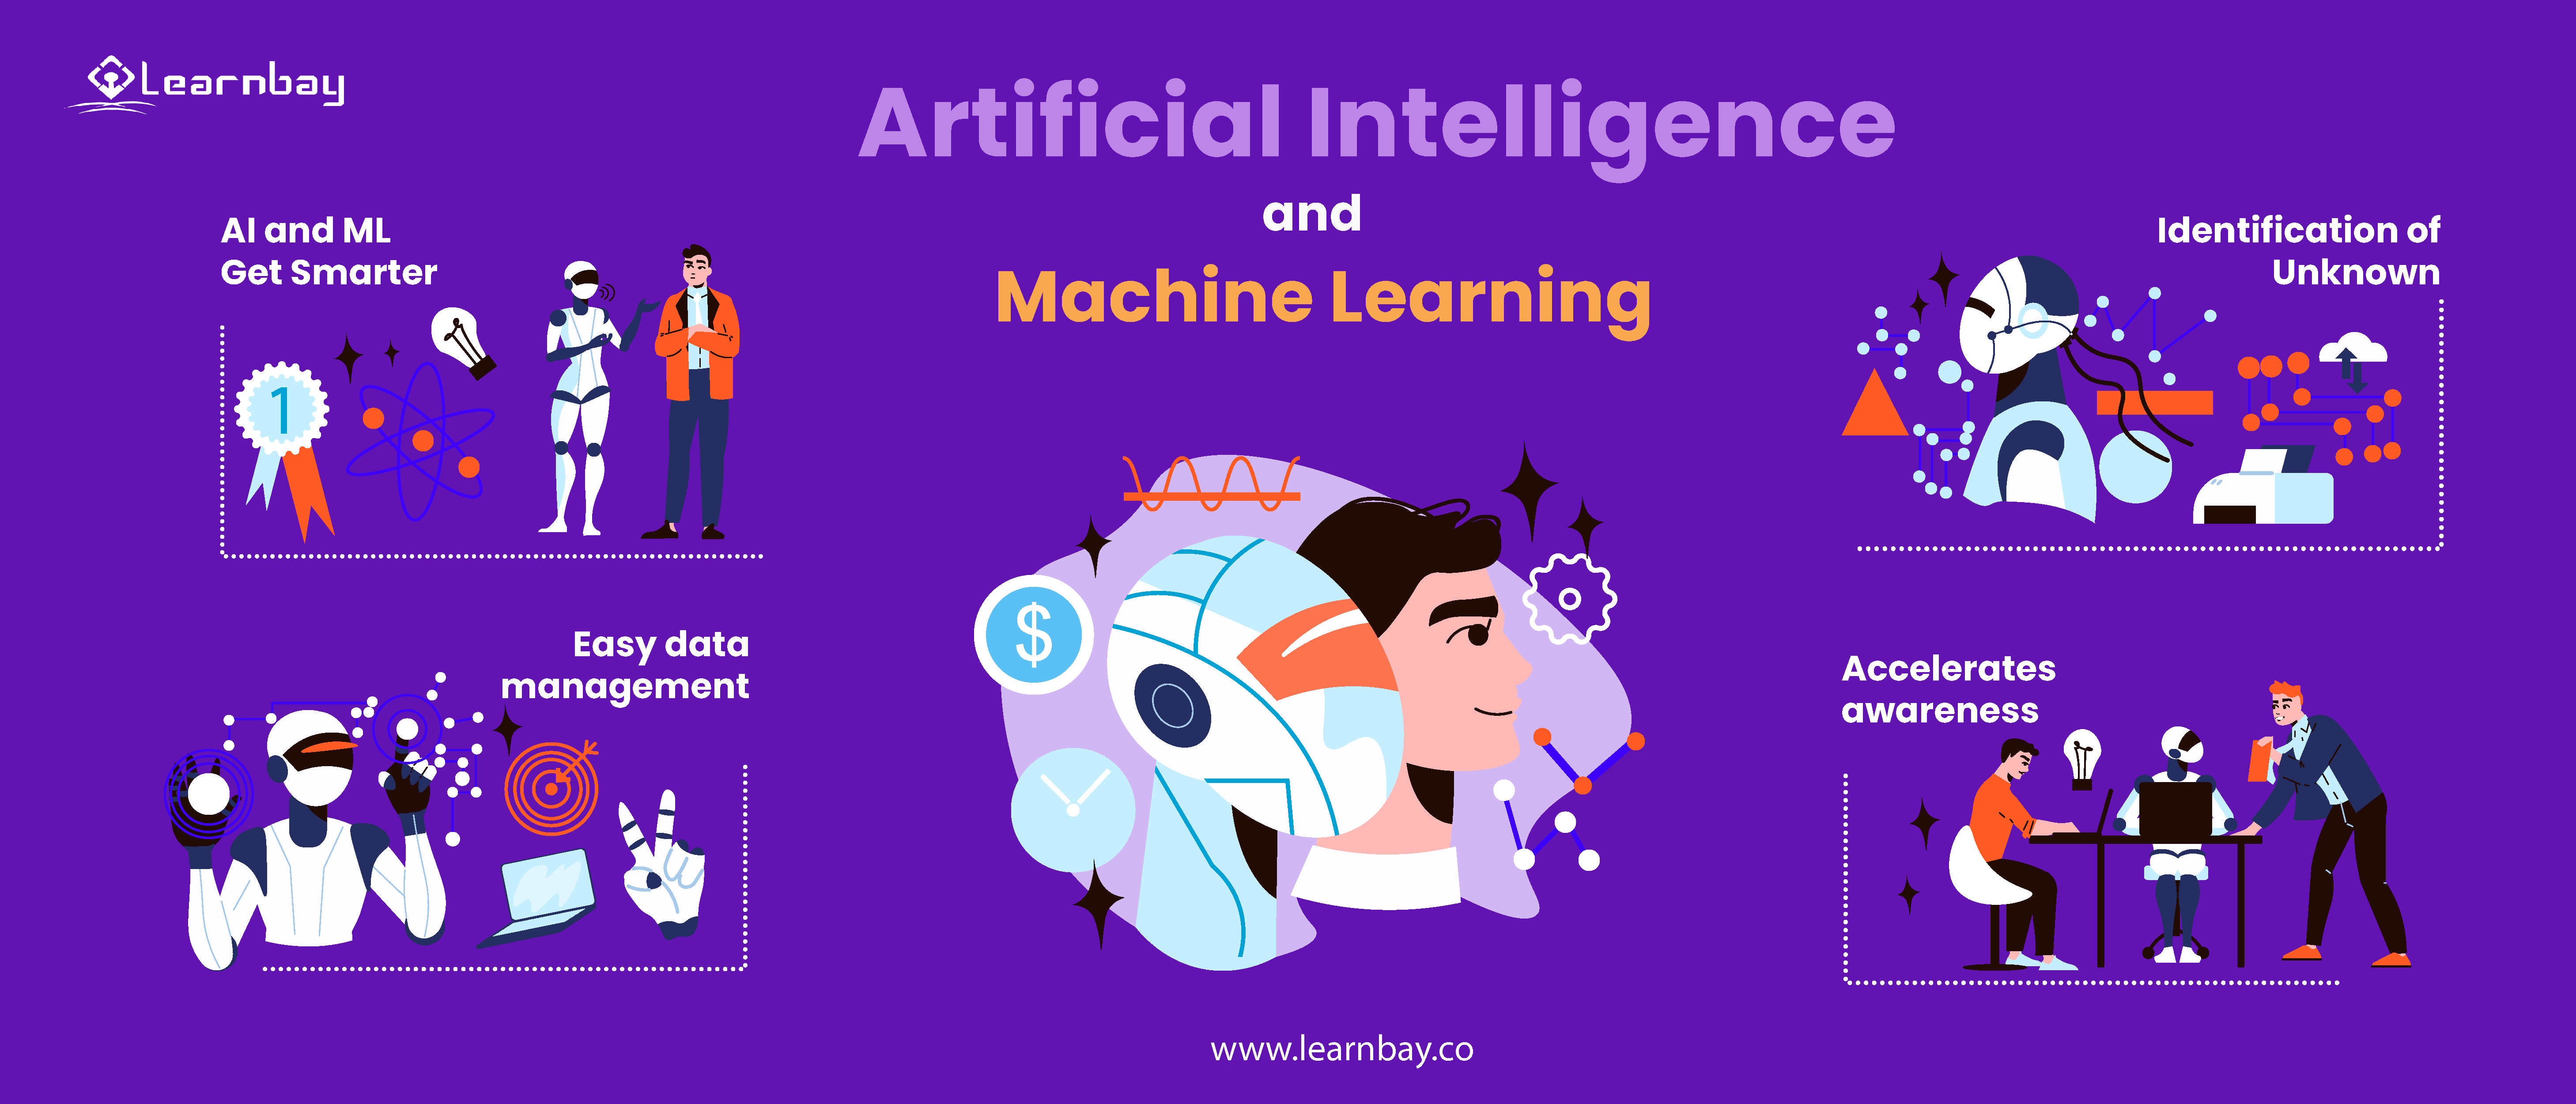 An illustration of an AI-based robot interreacting with humans suggests various advantages such as:-
AI and ML Get Smatter 
Identification of unknown threat
Easy data management
Accelerates awareness